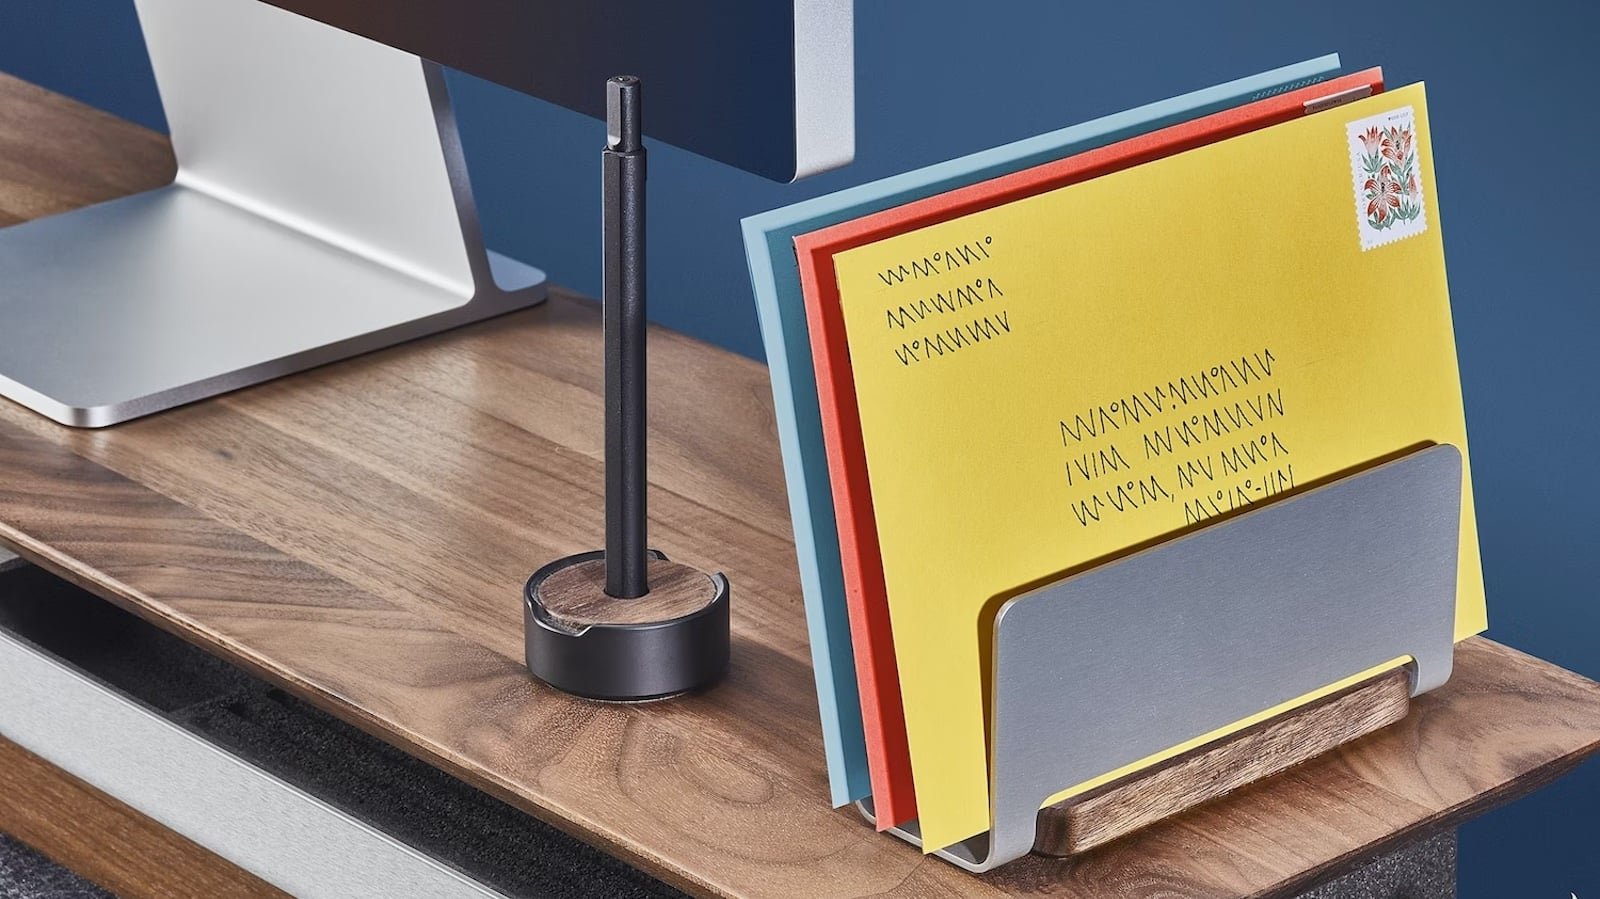 Grovemade Vertical Organizer has a sculptural shape that keeps letters looking tidy